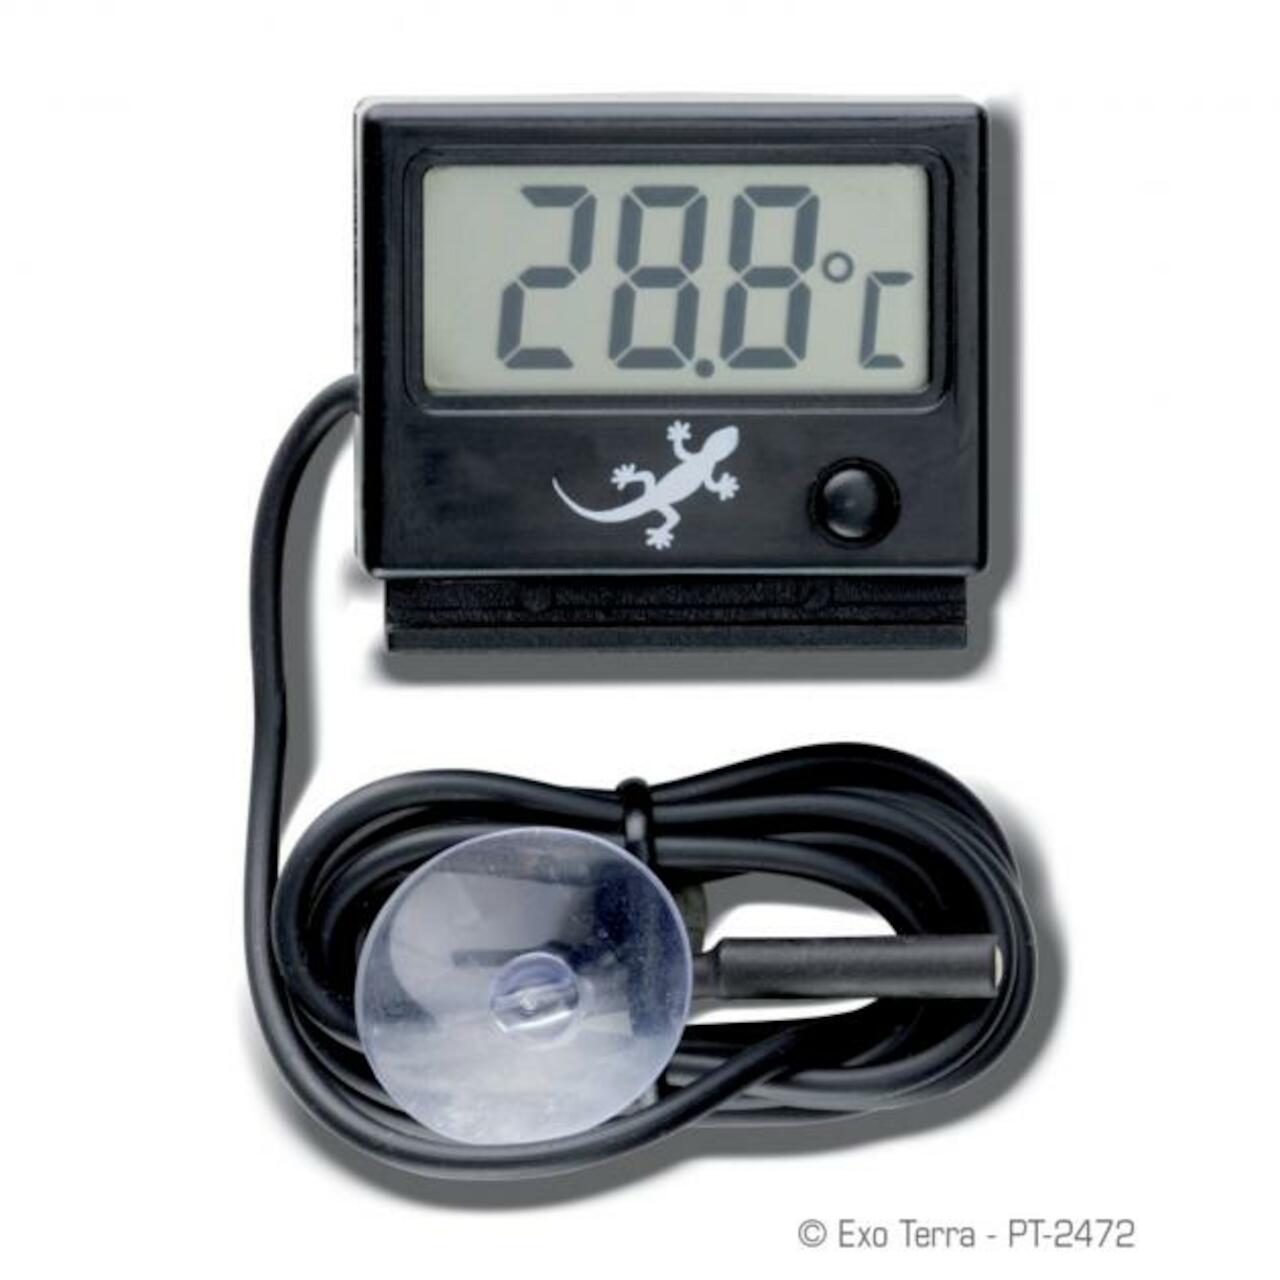 Exo Tera Digitales Thermometer